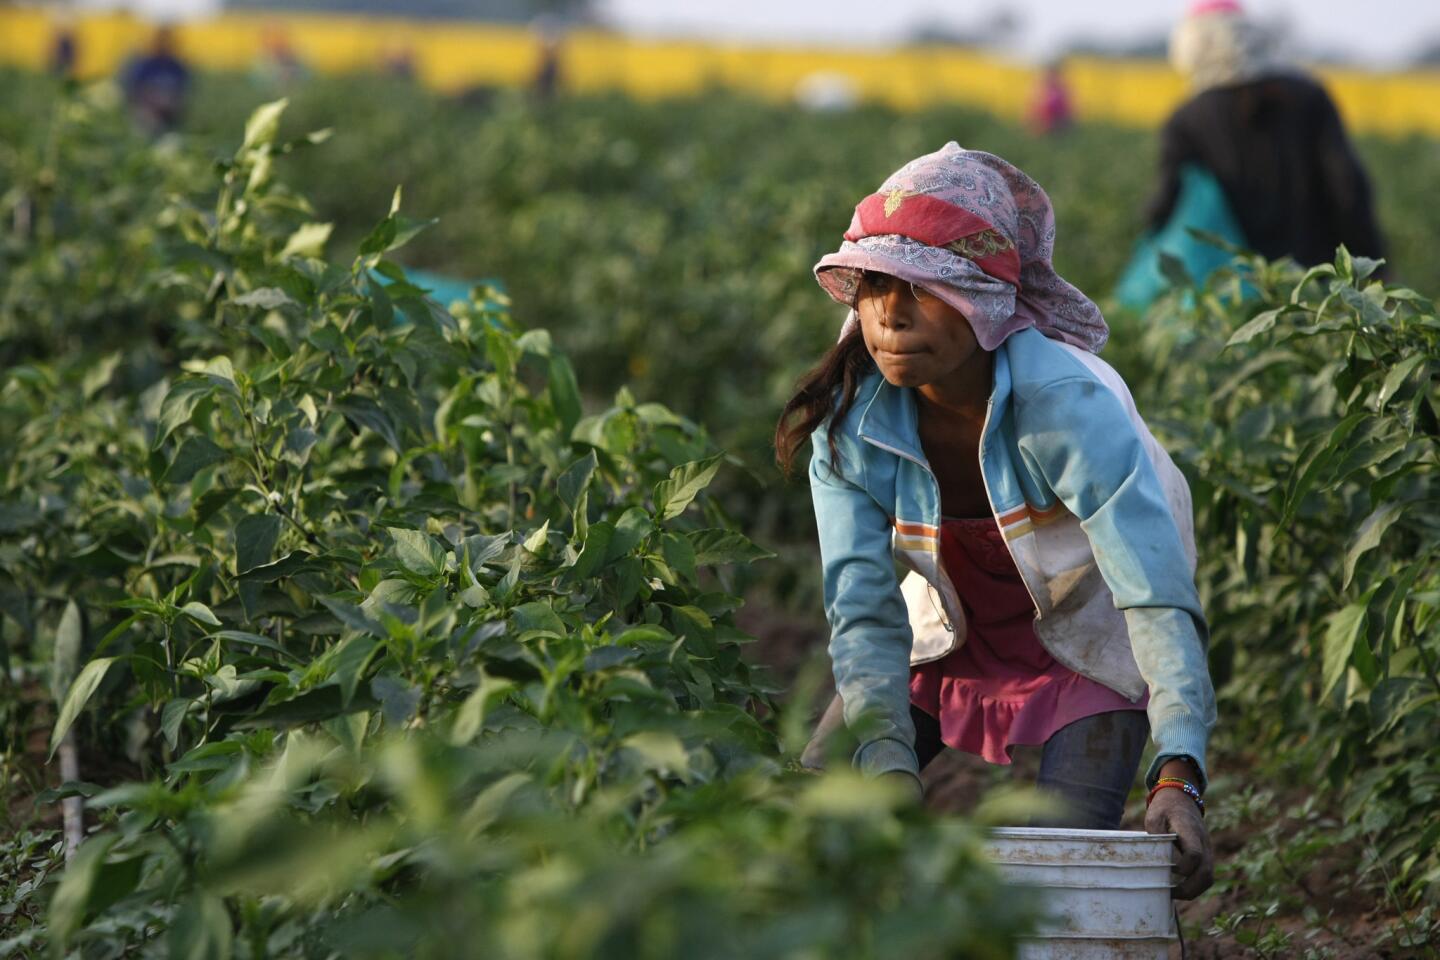 Alejandrina Castillo, 12, picks chile peppers near Teacapan, Sinaloa. She is among an estimated 100,000 children across Mexico who toil in the fields. Many work for farms that export produce to the U.S.